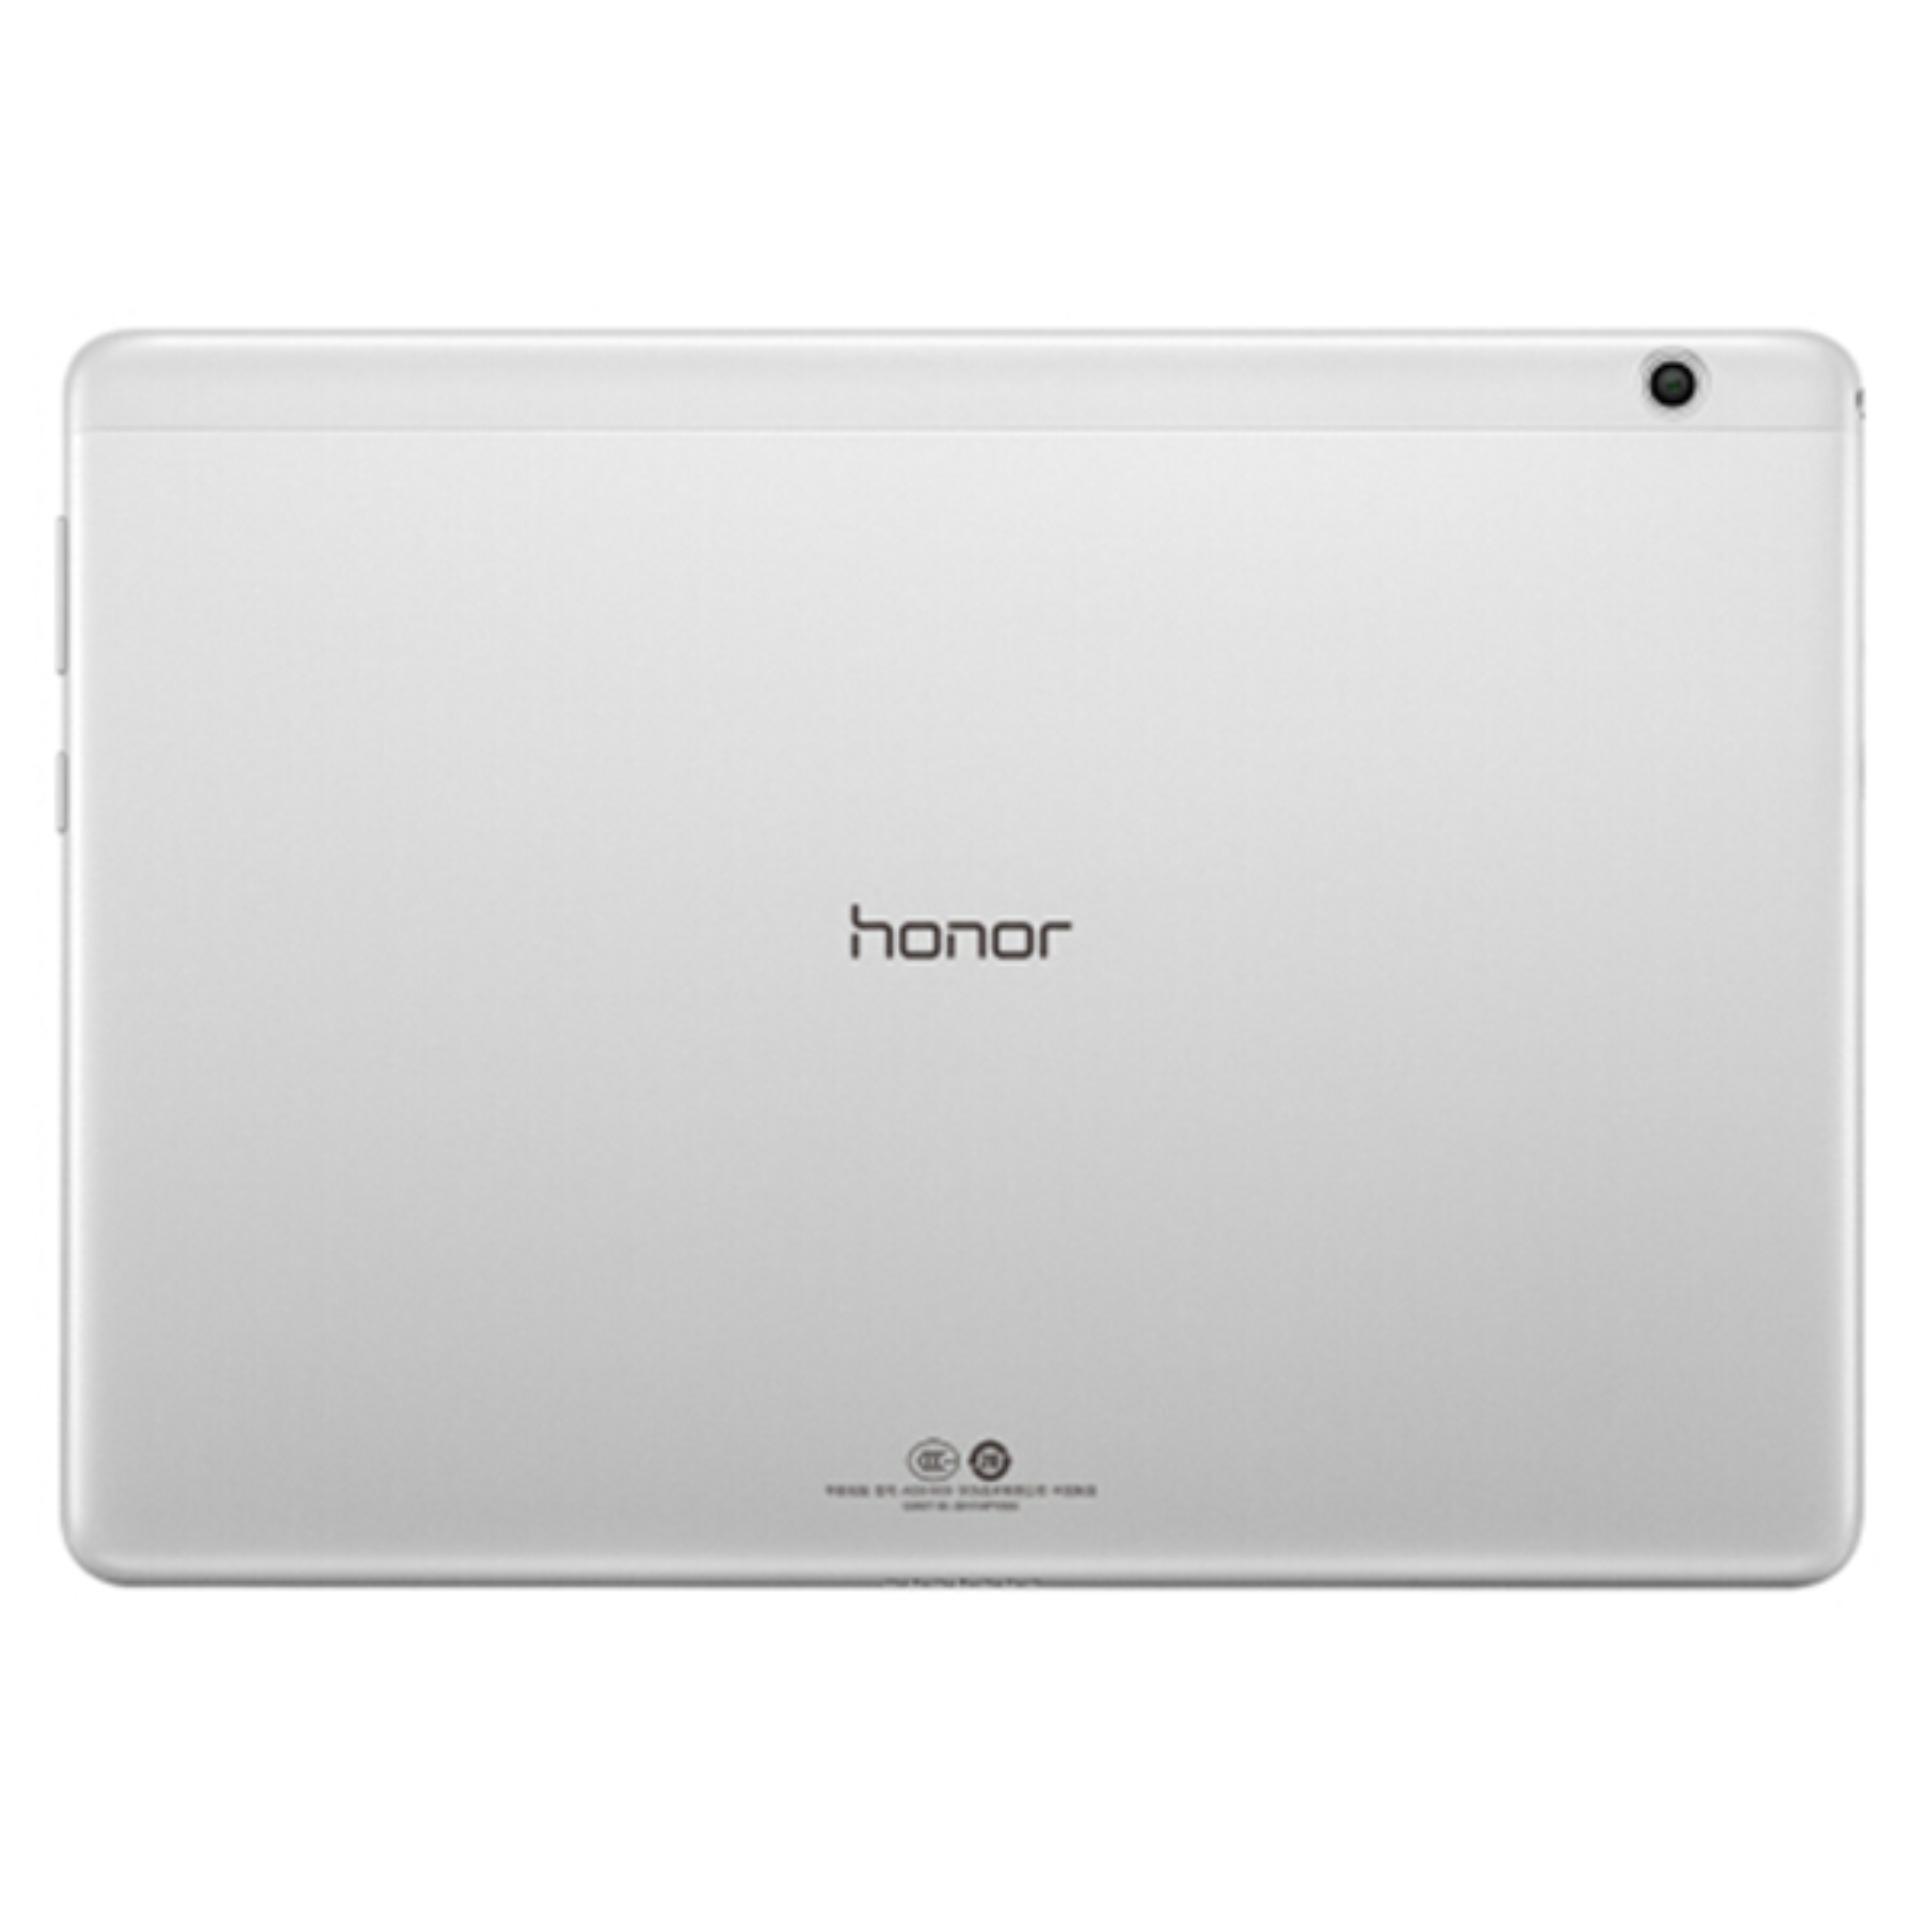 HUAWEI Honor T3 AGS-W09 9.6inch 2G+16G WIFI Version With Keyboard